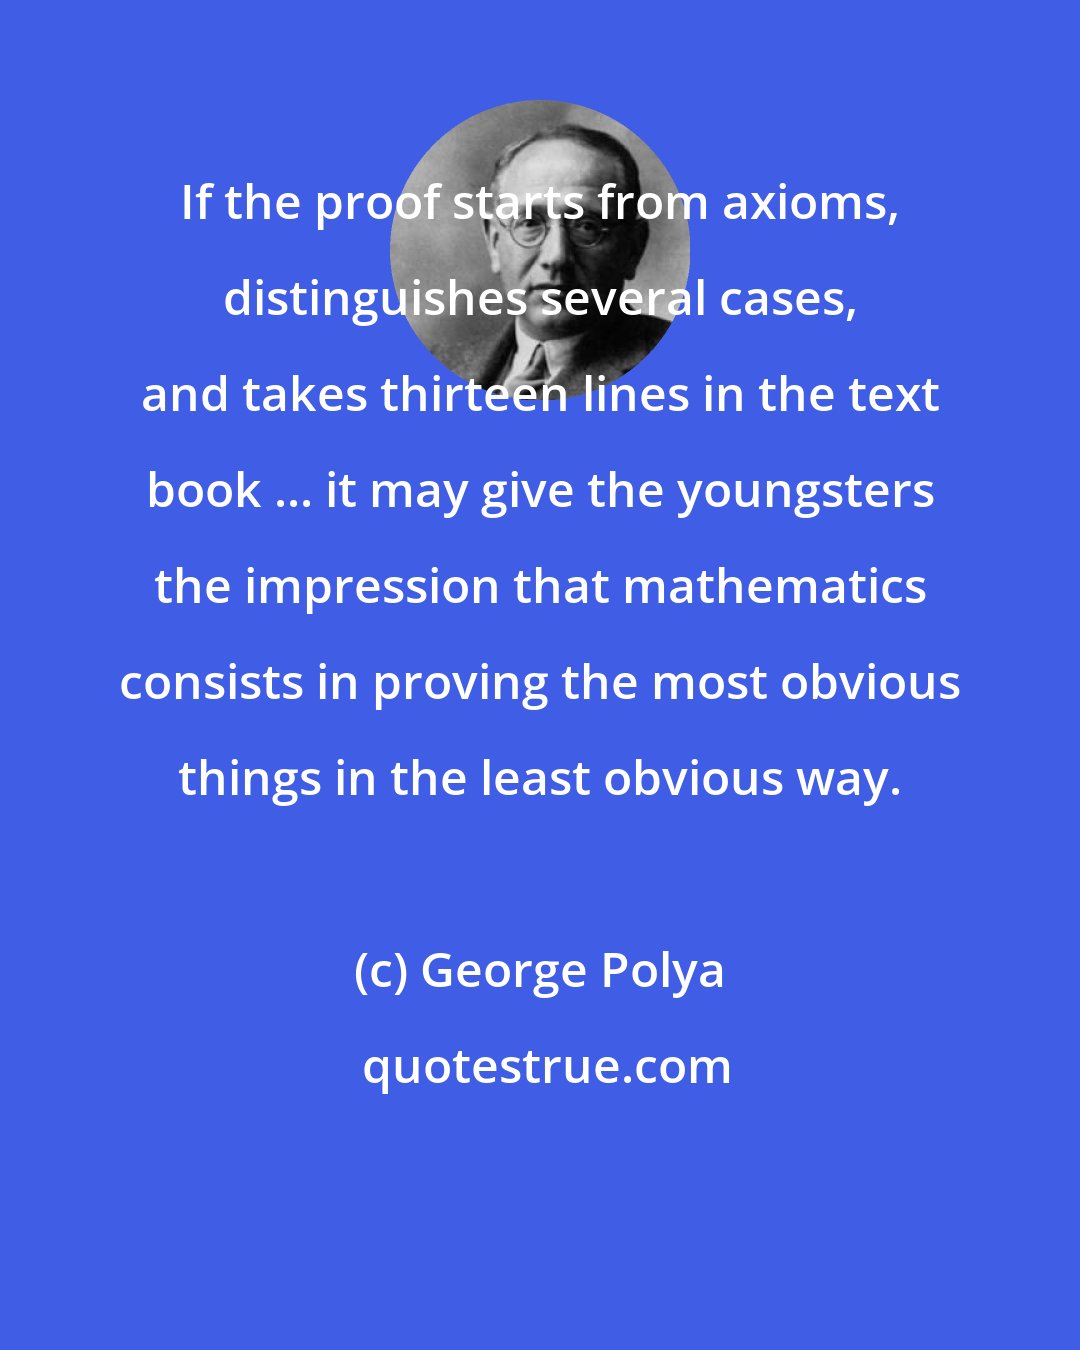 George Polya: If the proof starts from axioms, distinguishes several cases, and takes thirteen lines in the text book ... it may give the youngsters the impression that mathematics consists in proving the most obvious things in the least obvious way.